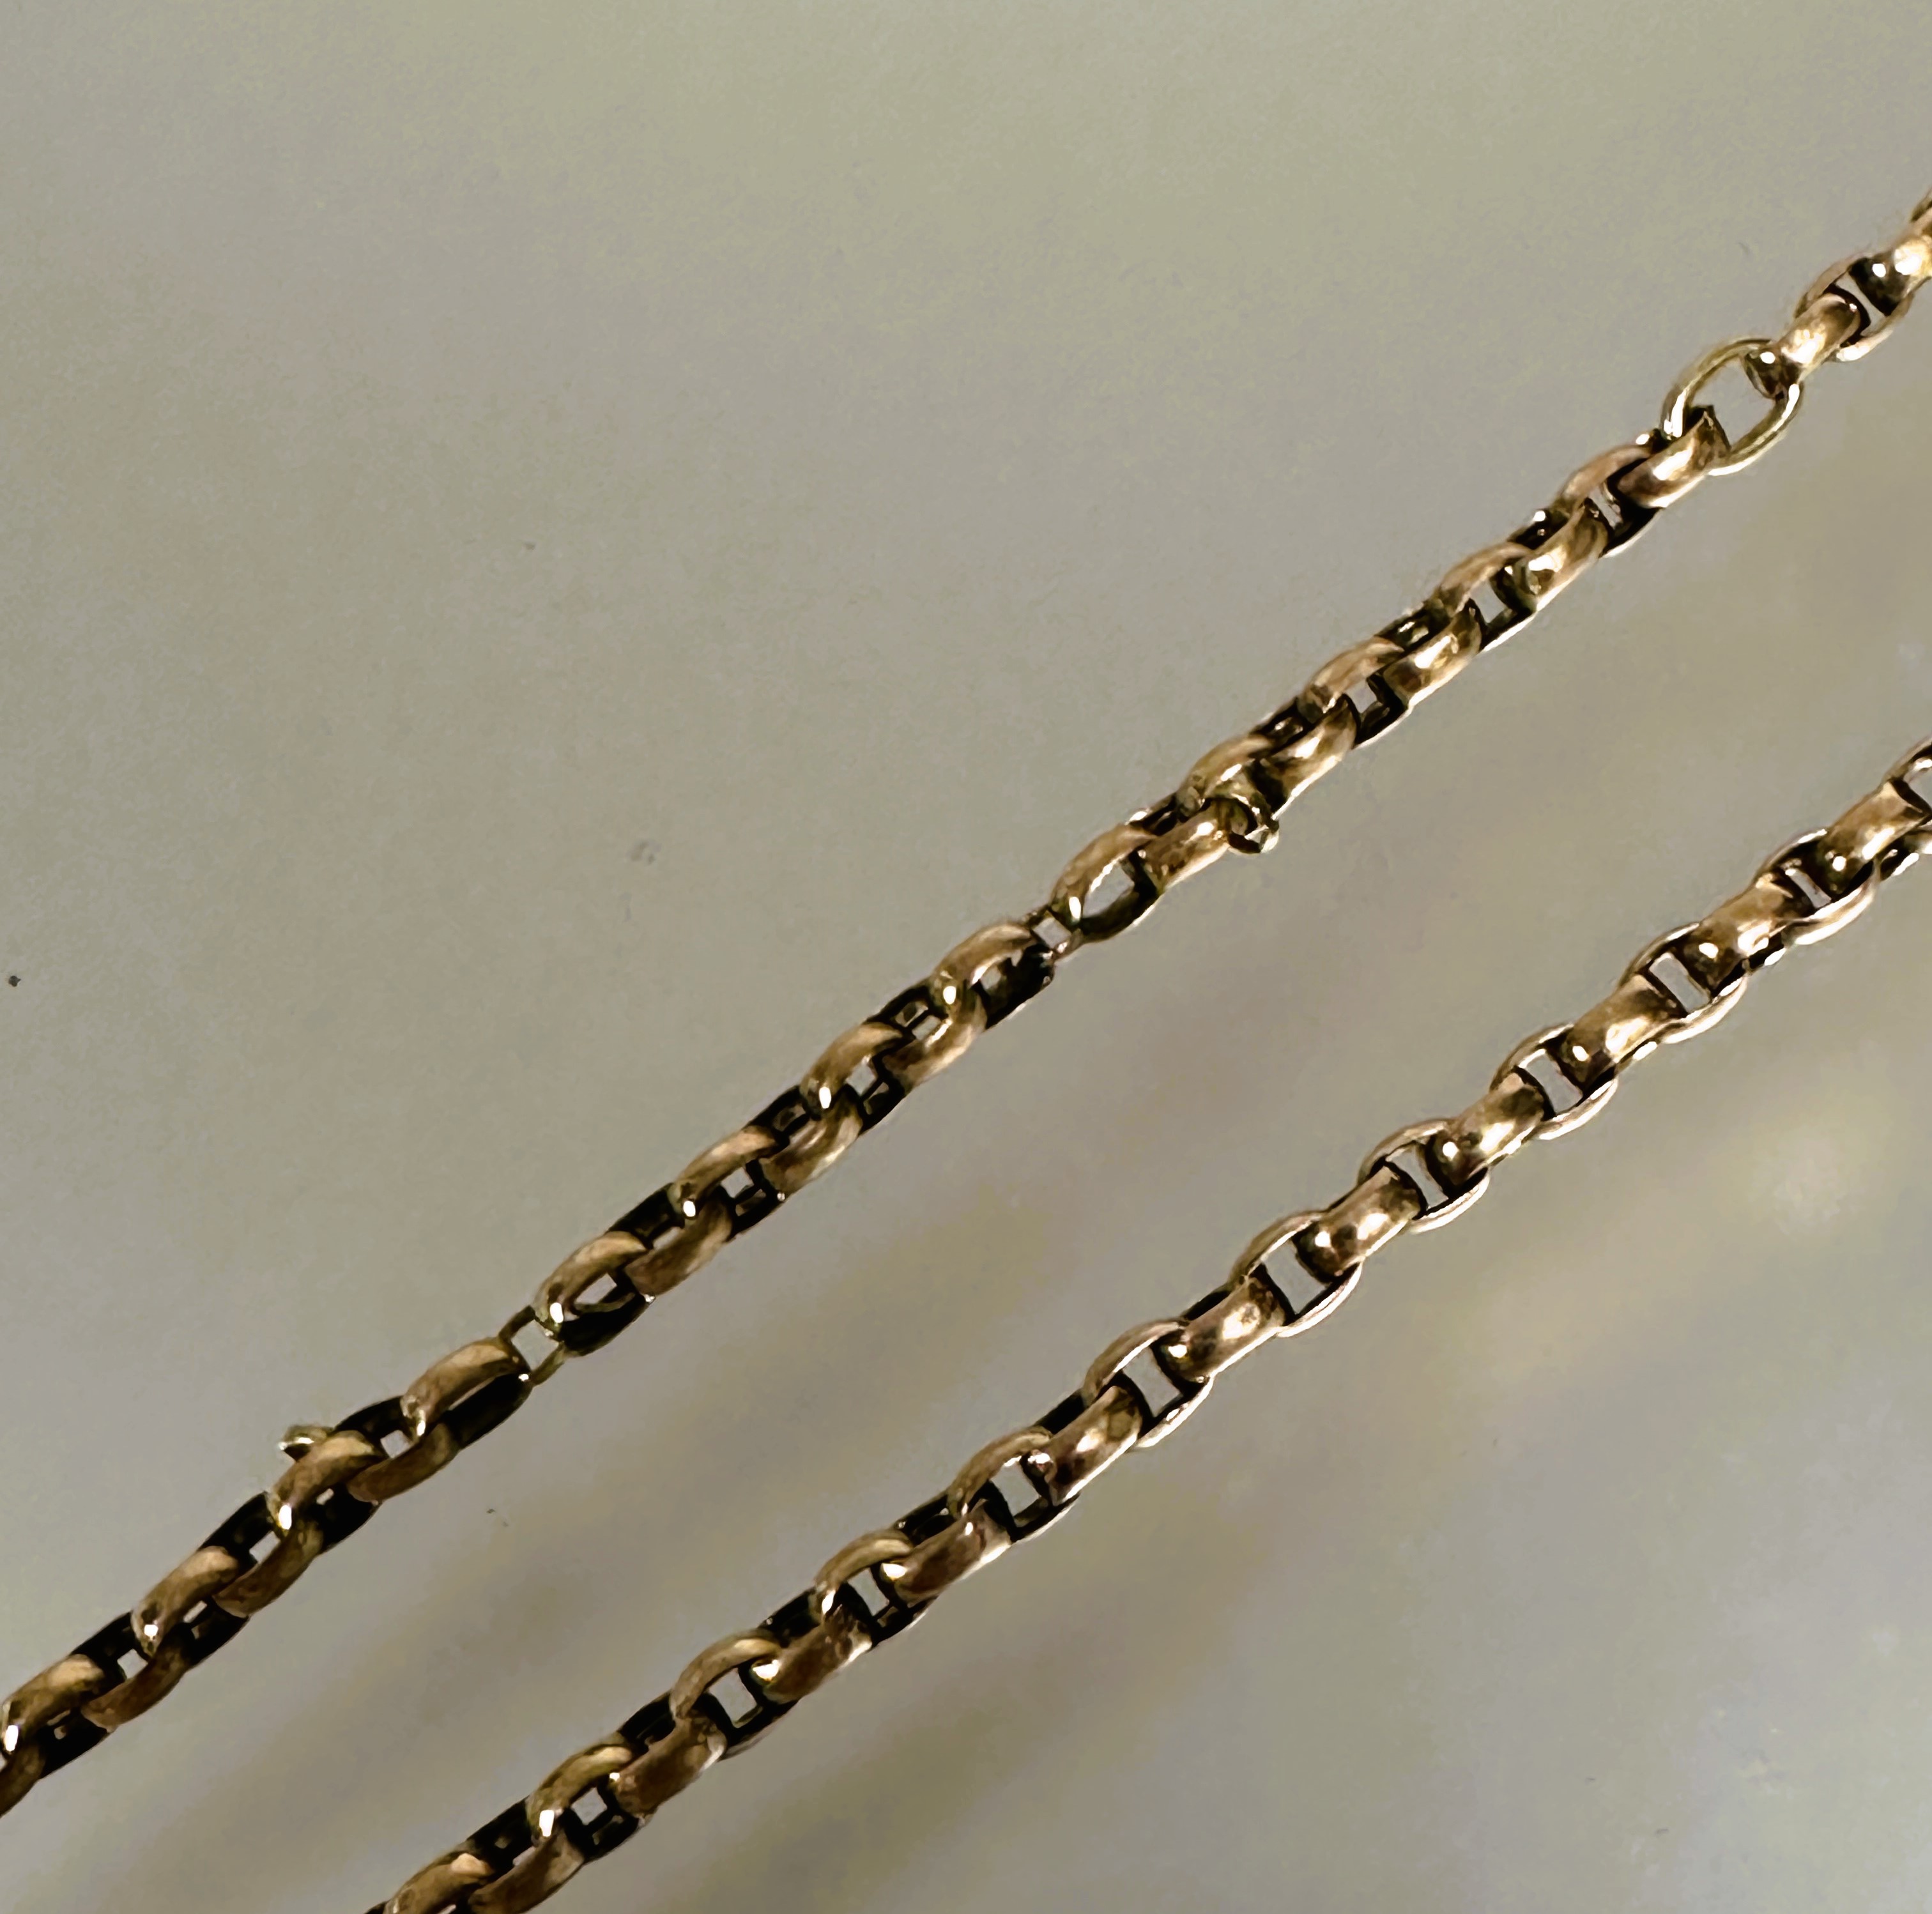 A Edwardian 9ct gold belcher link chain necklace with barrel clasp fastening L x 24cm - Image 3 of 5